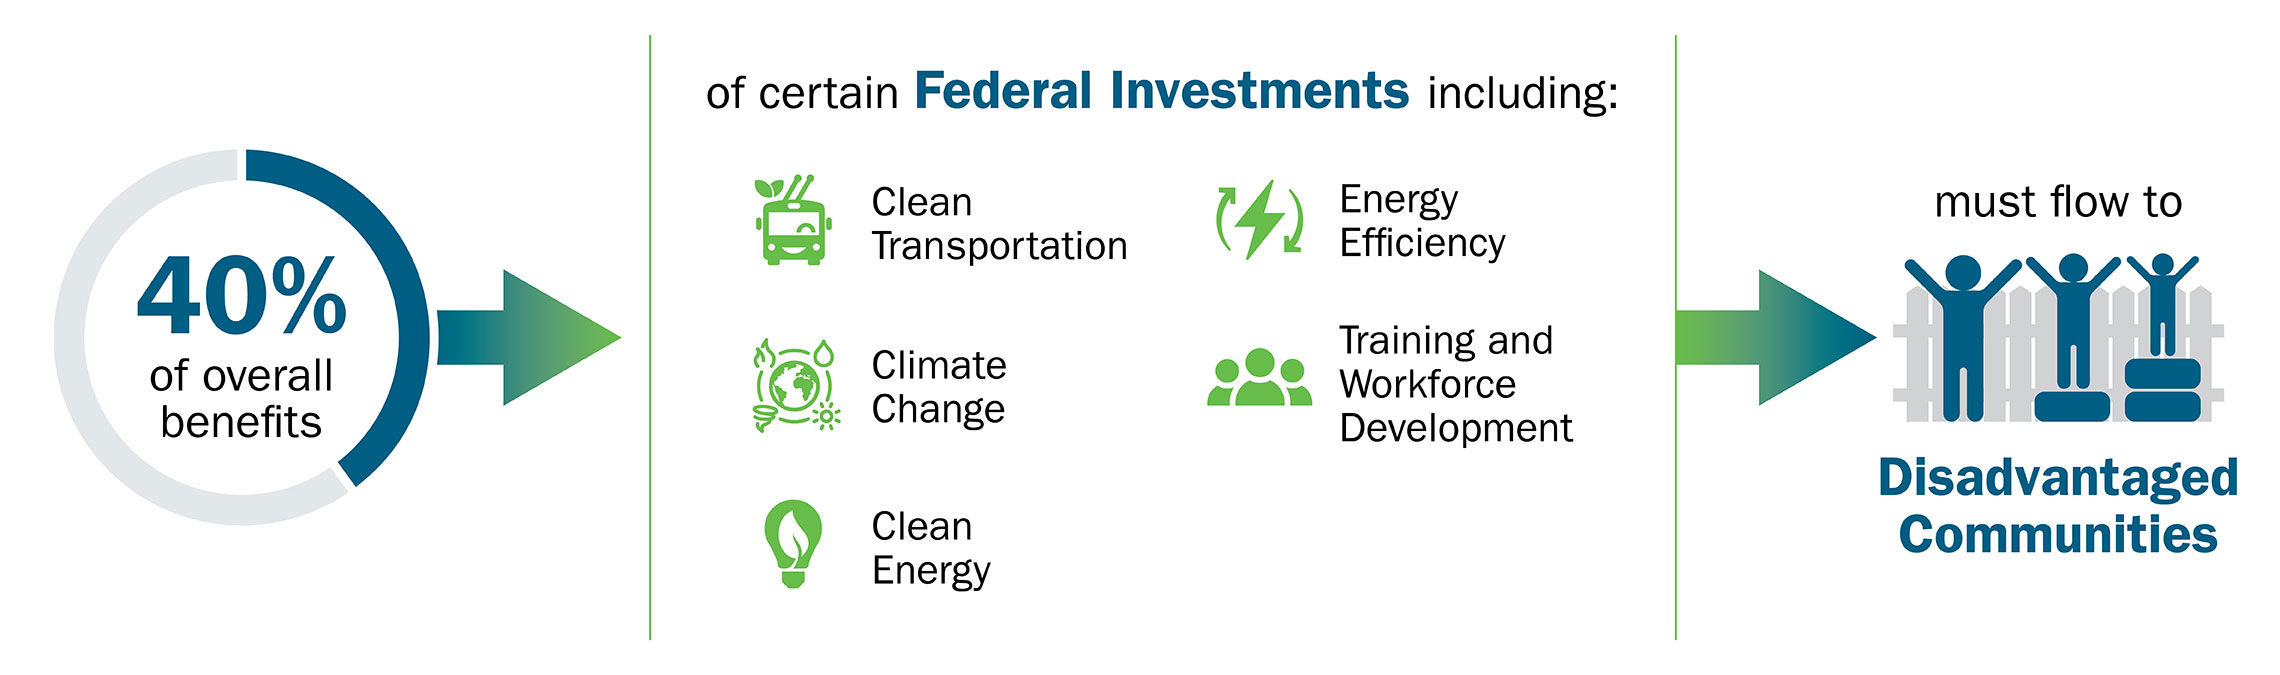 40% of overall benefits of certain federal investments including clean transportation, energy efficiency, climate change, training and workforce development, and clean energy must flow to disadvantaged communities.